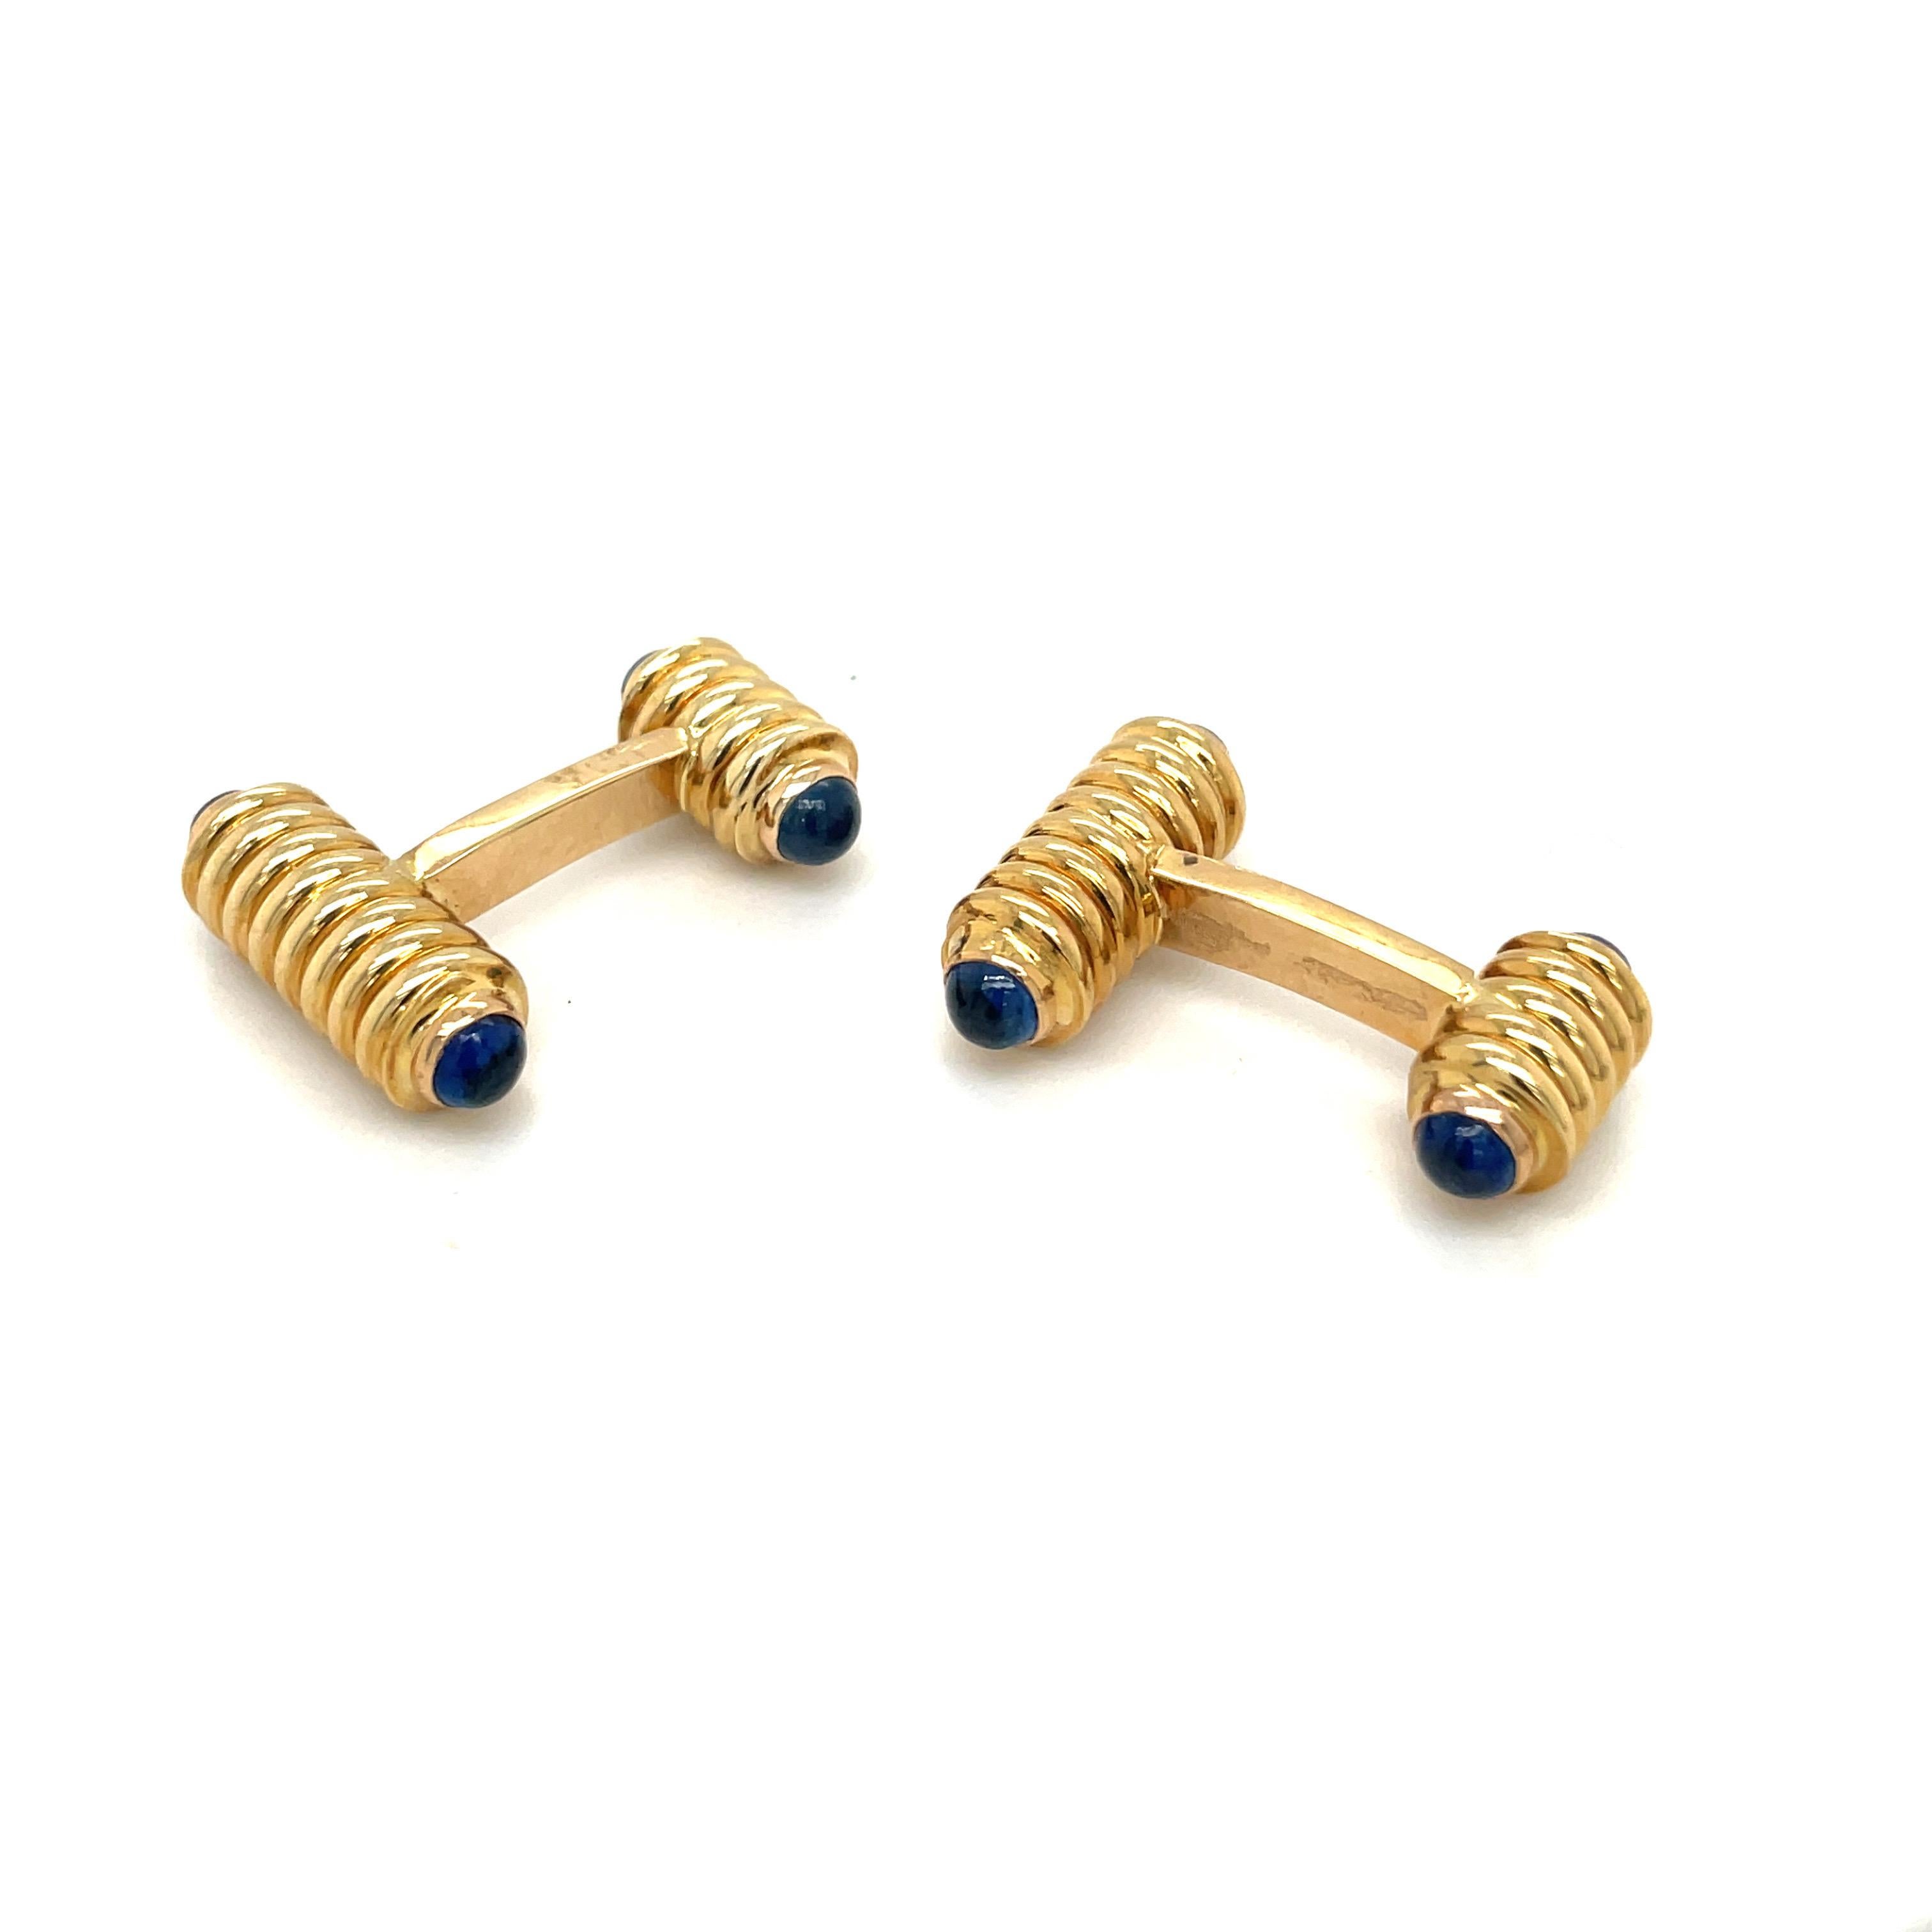 Classic bar style cuff links in 18 karat yellow gold. The cuff links are tipped with 4 blue sapphire cabochons. They measure 1